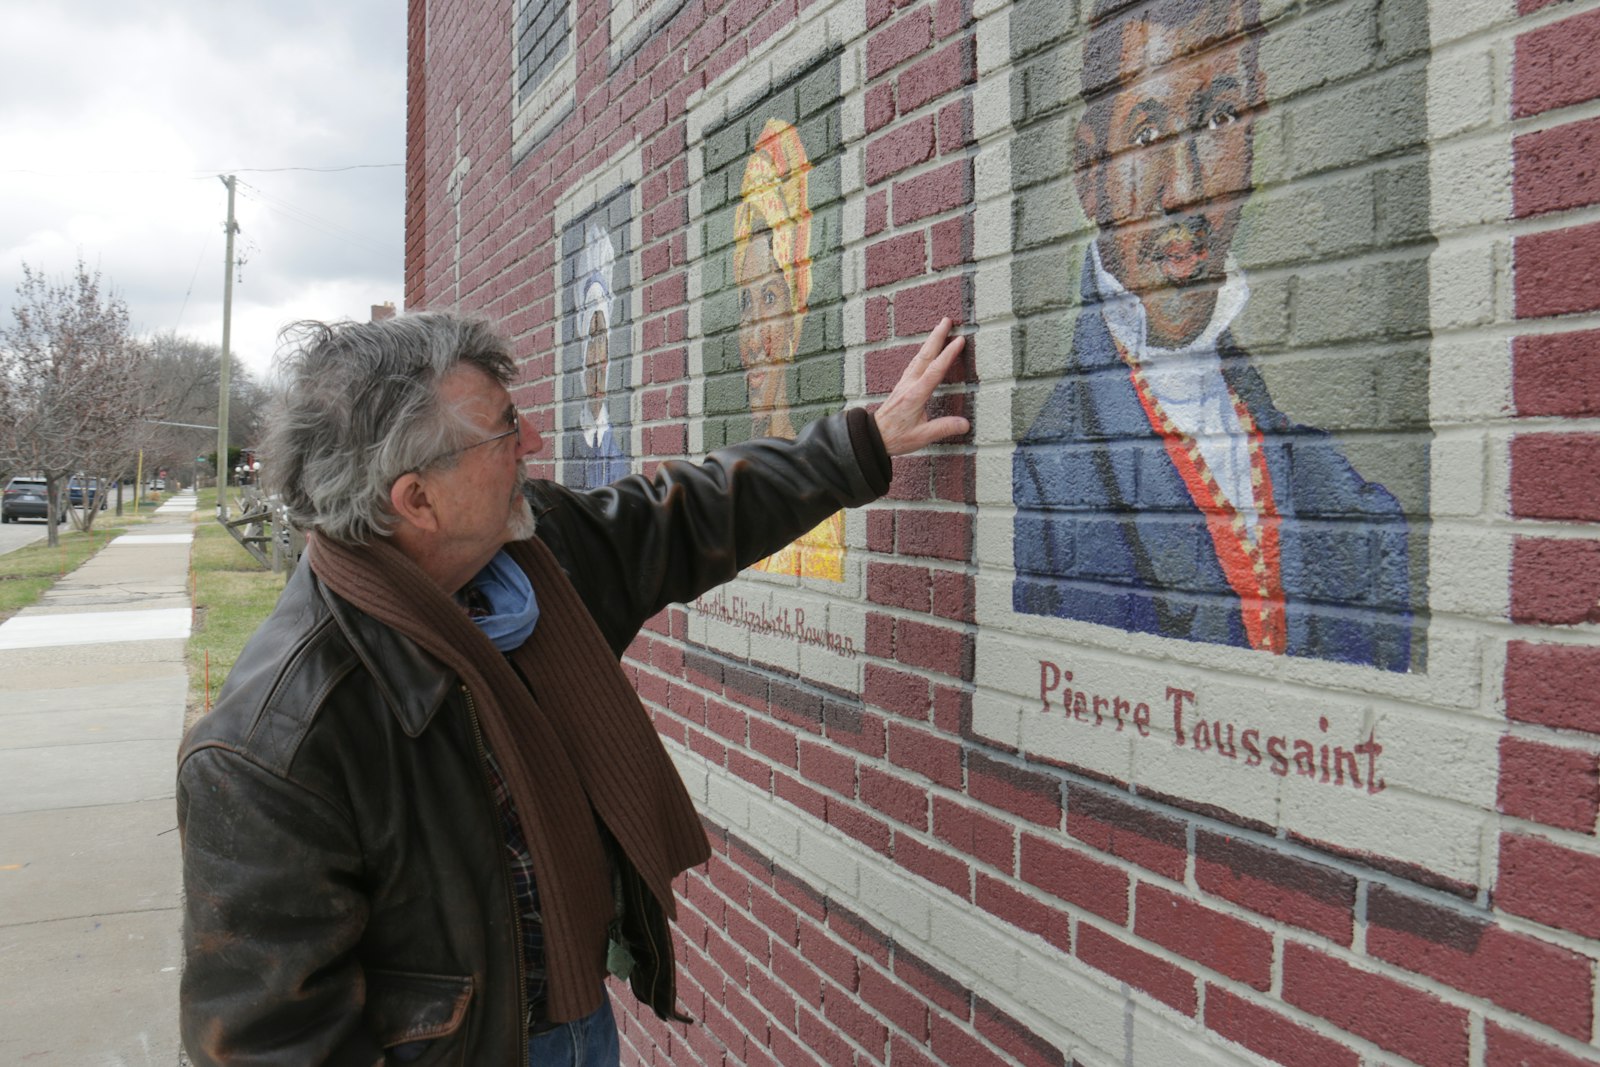 Orlowski said his newest mural was inspired by the spirit of Detroit's African-American Catholic community, which he came to appreciate after spending time teaching in Detroit Public Schools, he said. Orlowski's other works can be found in churches and public spaces throughout the city.